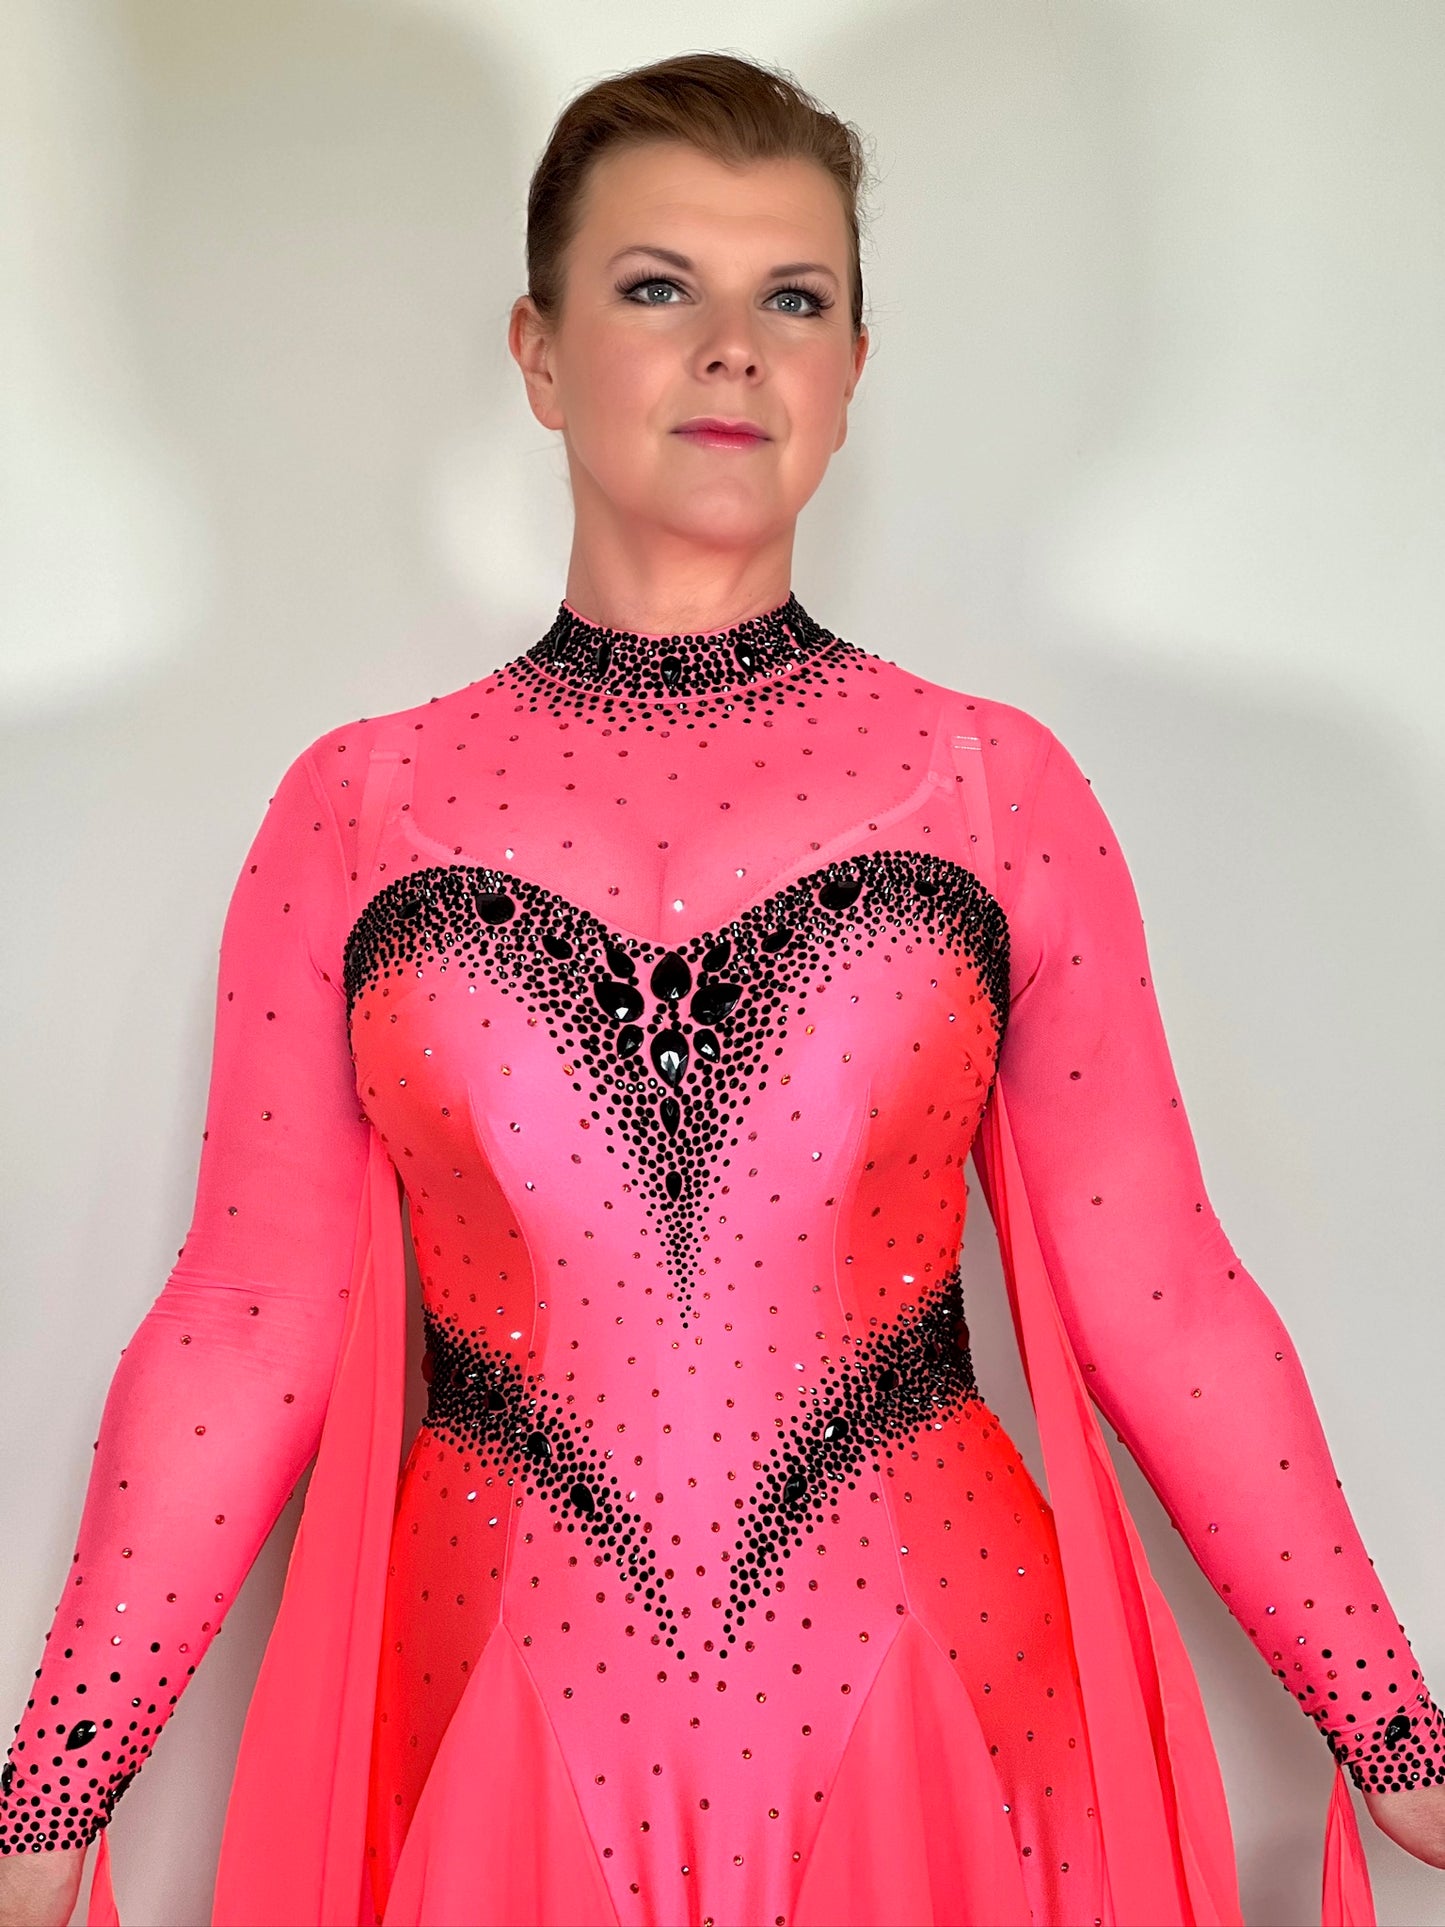 004 Striking Coral Ballroom Dress. Heavily decorated detailing in Jet stones. High back with detachable floats. A stand out eye catching dress.